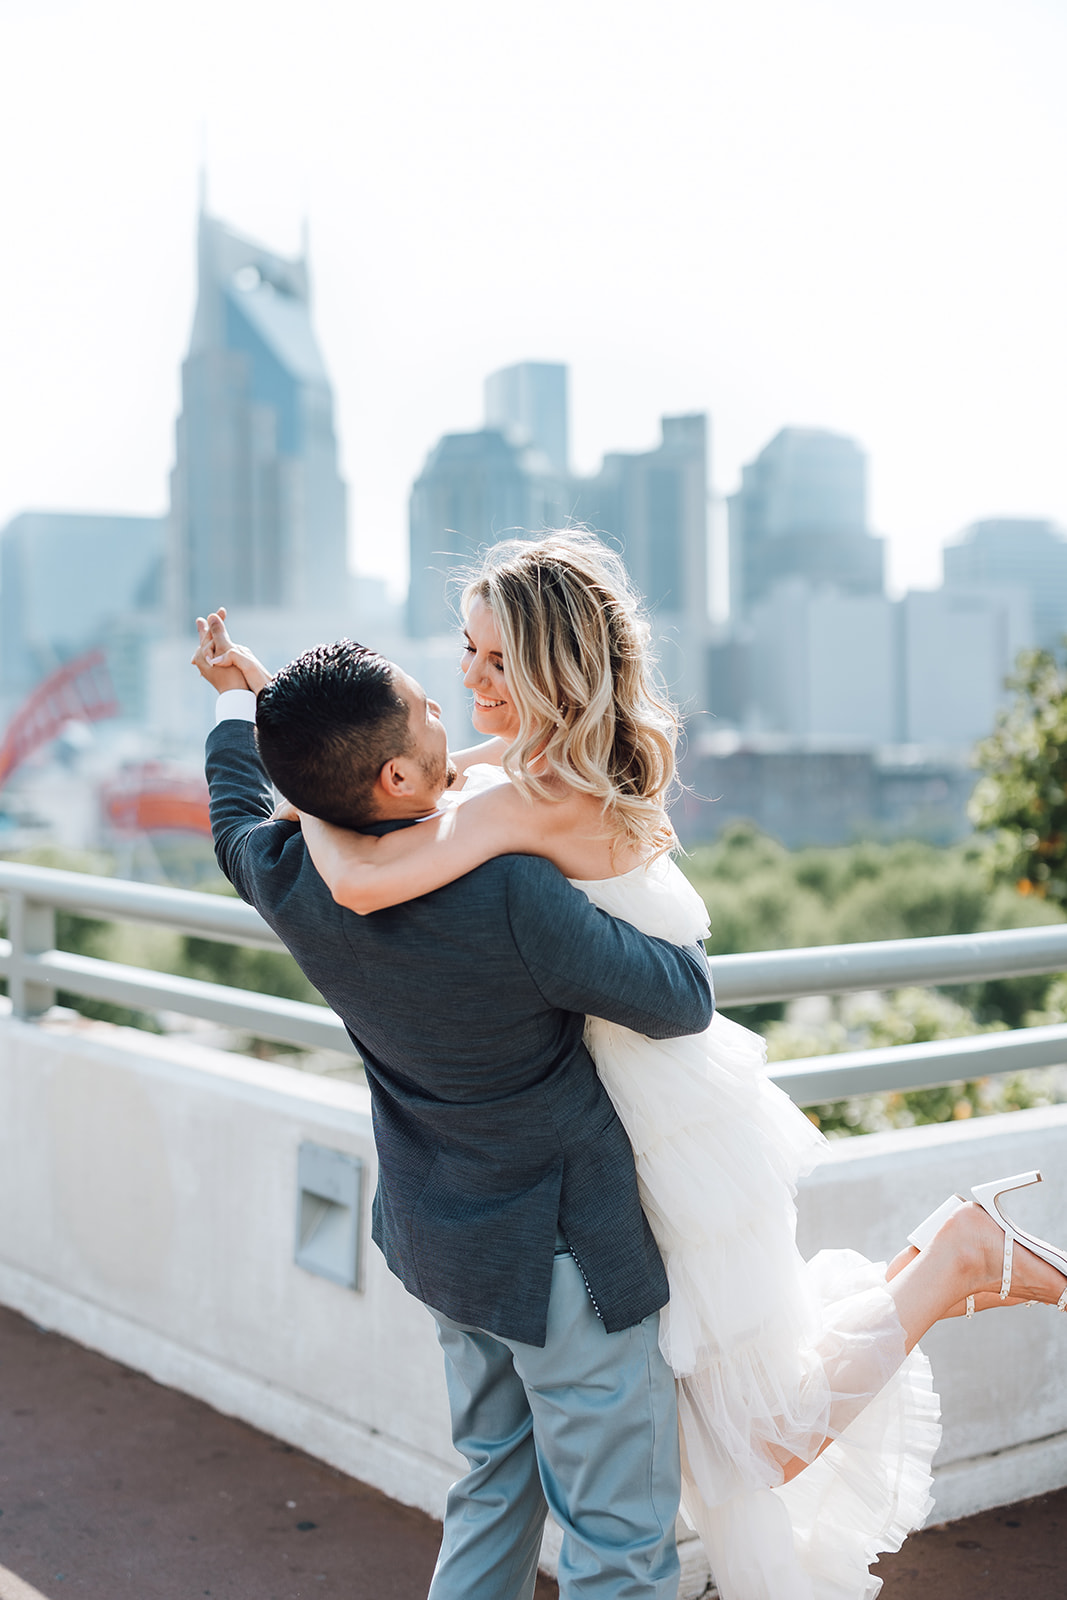 A groom lifts his bride as they dance on a rooftop at The Bridge Building Nashville